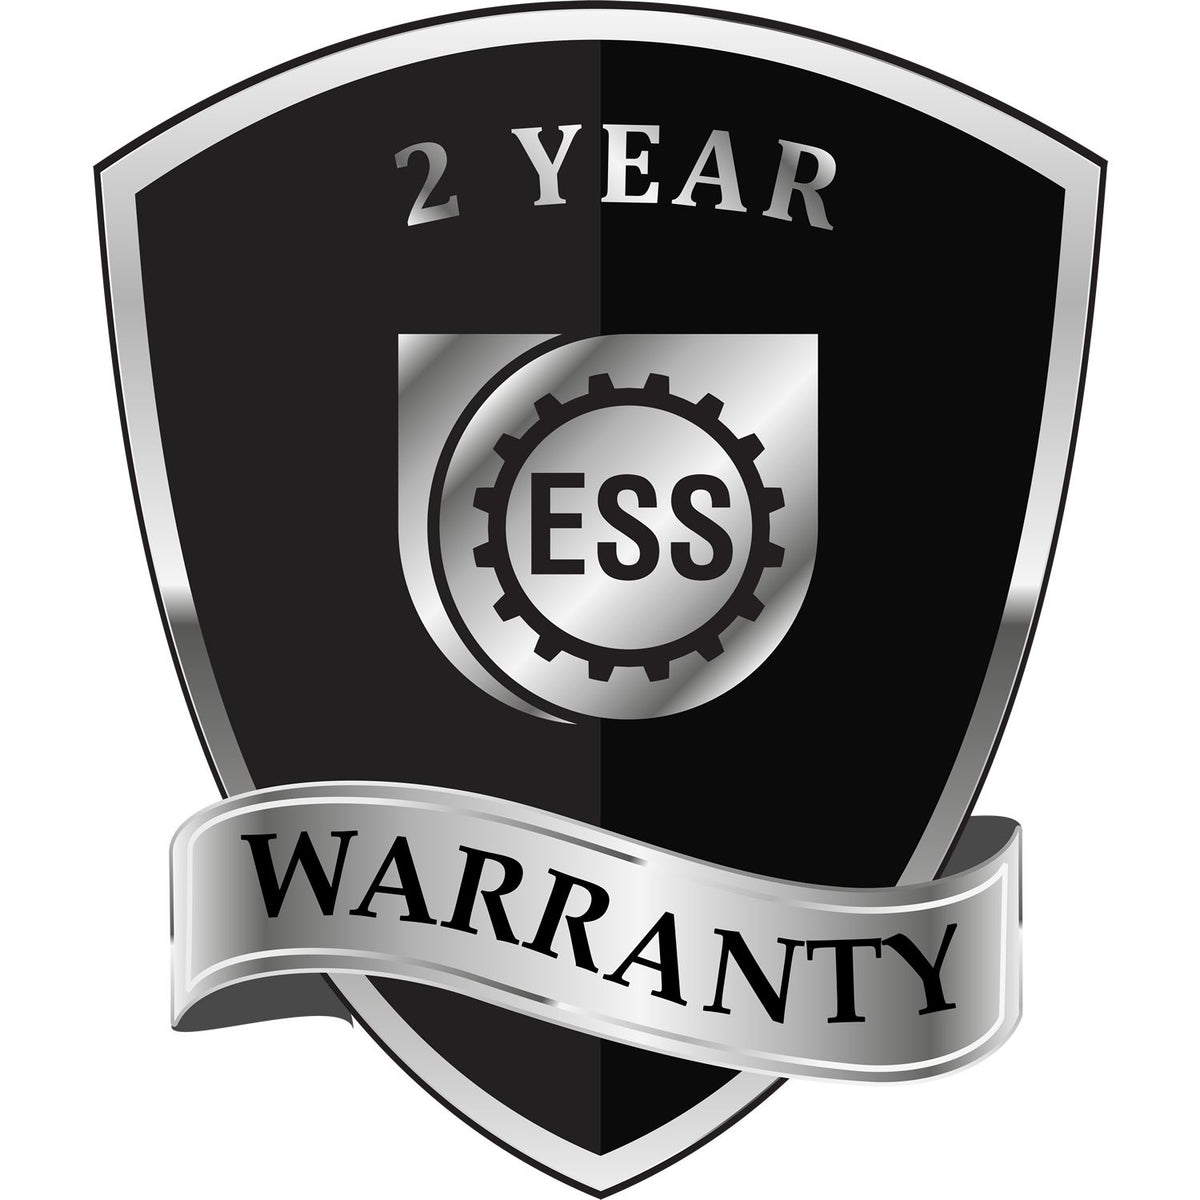 A badge or emblem showing a warranty icon for the Heavy Duty Cast Iron Arizona Engineer Seal Embosser